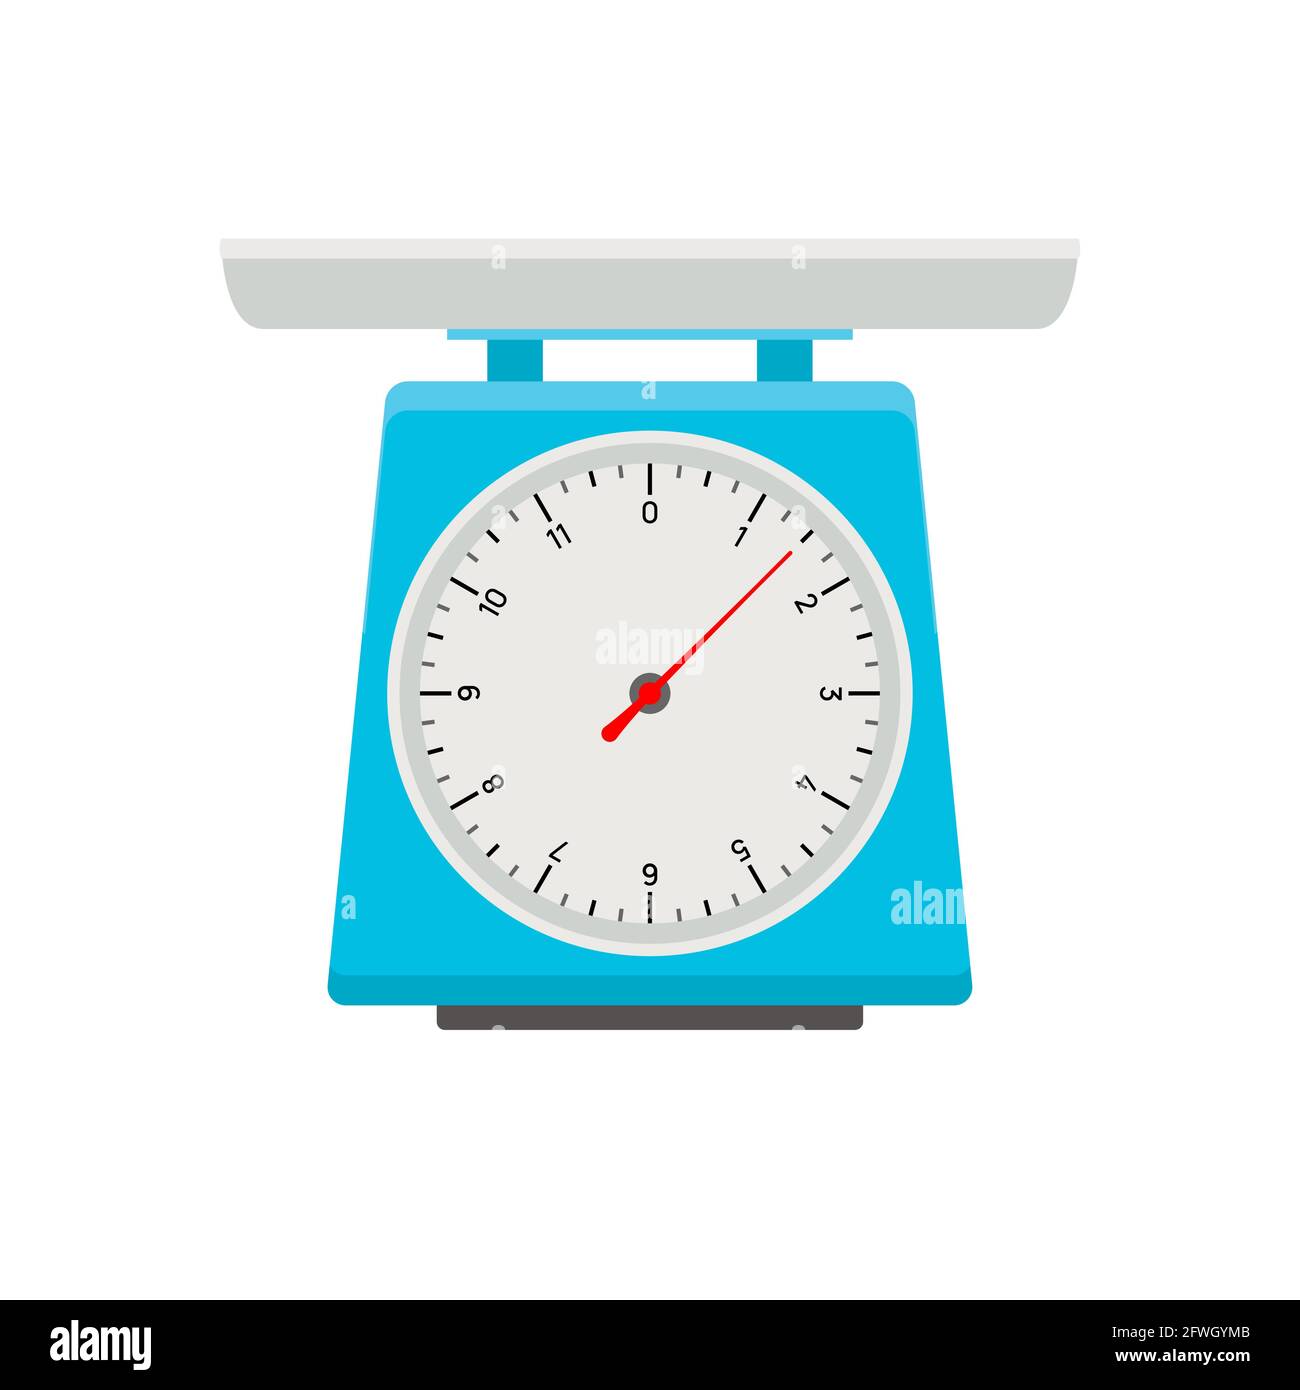 https://c8.alamy.com/comp/2FWGYMB/domestic-weigh-scale-food-balance-vector-icon-food-weight-kitchen-illustration-2FWGYMB.jpg